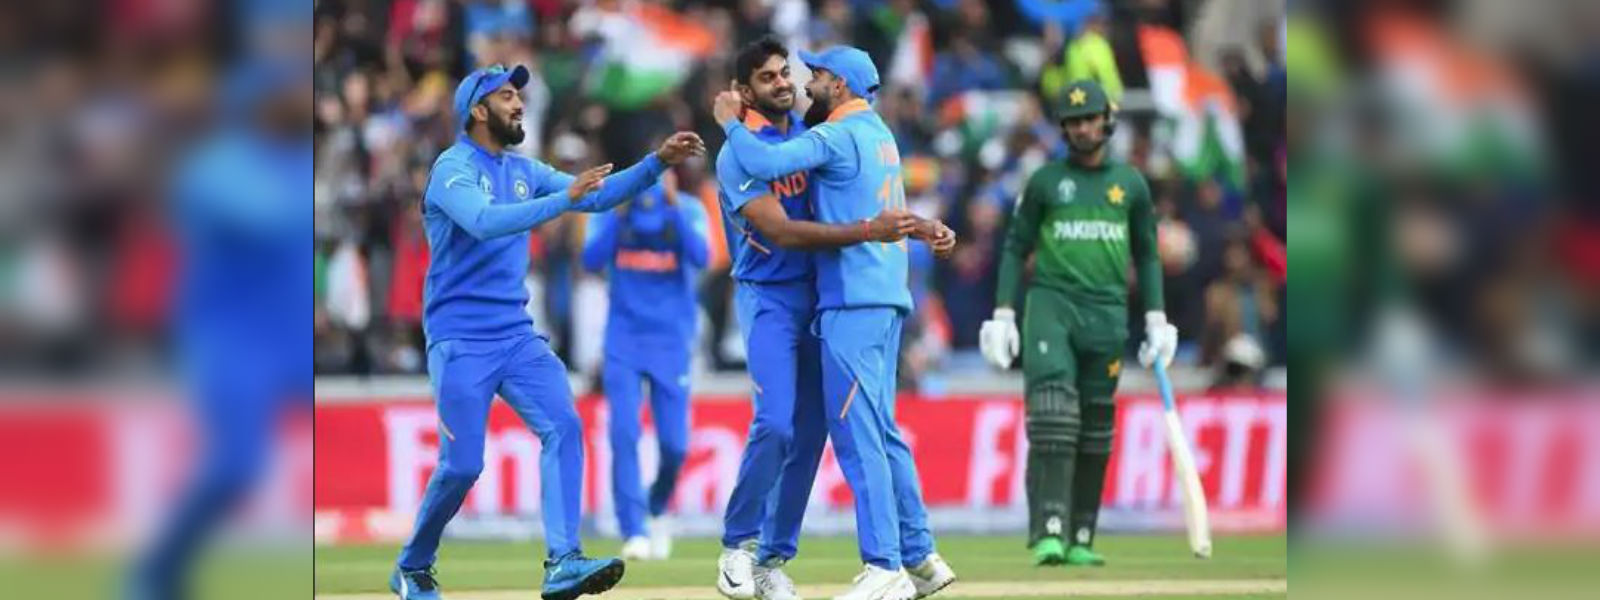 India retain upper hand in World Cup rivalry with Pakistan